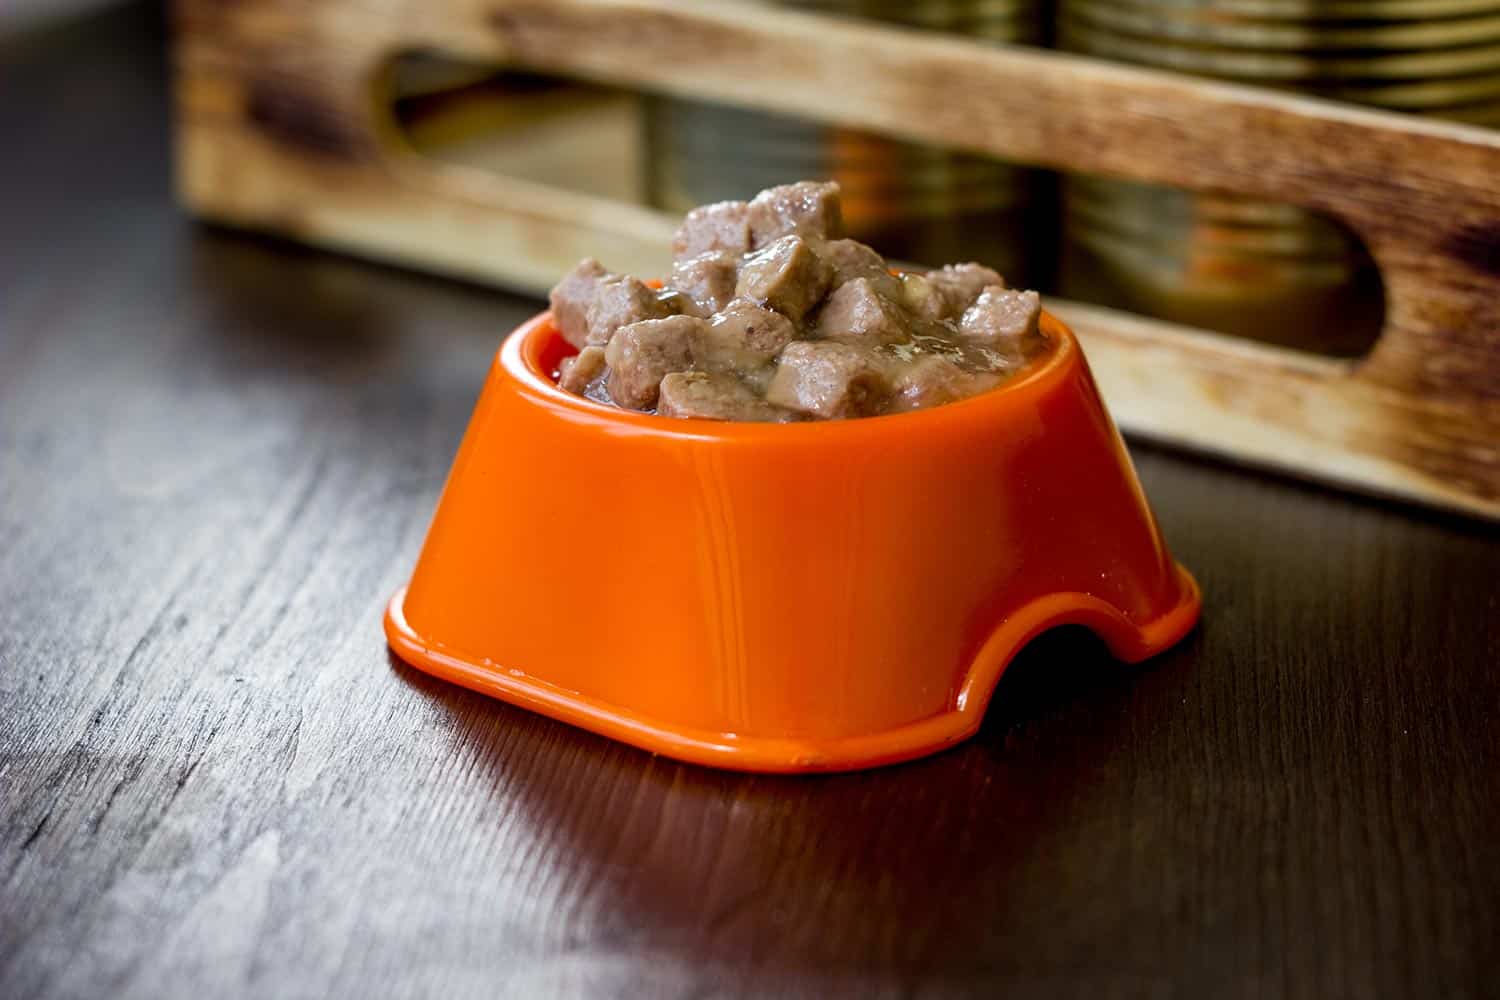 Canned pet food in a orange plastic bowl